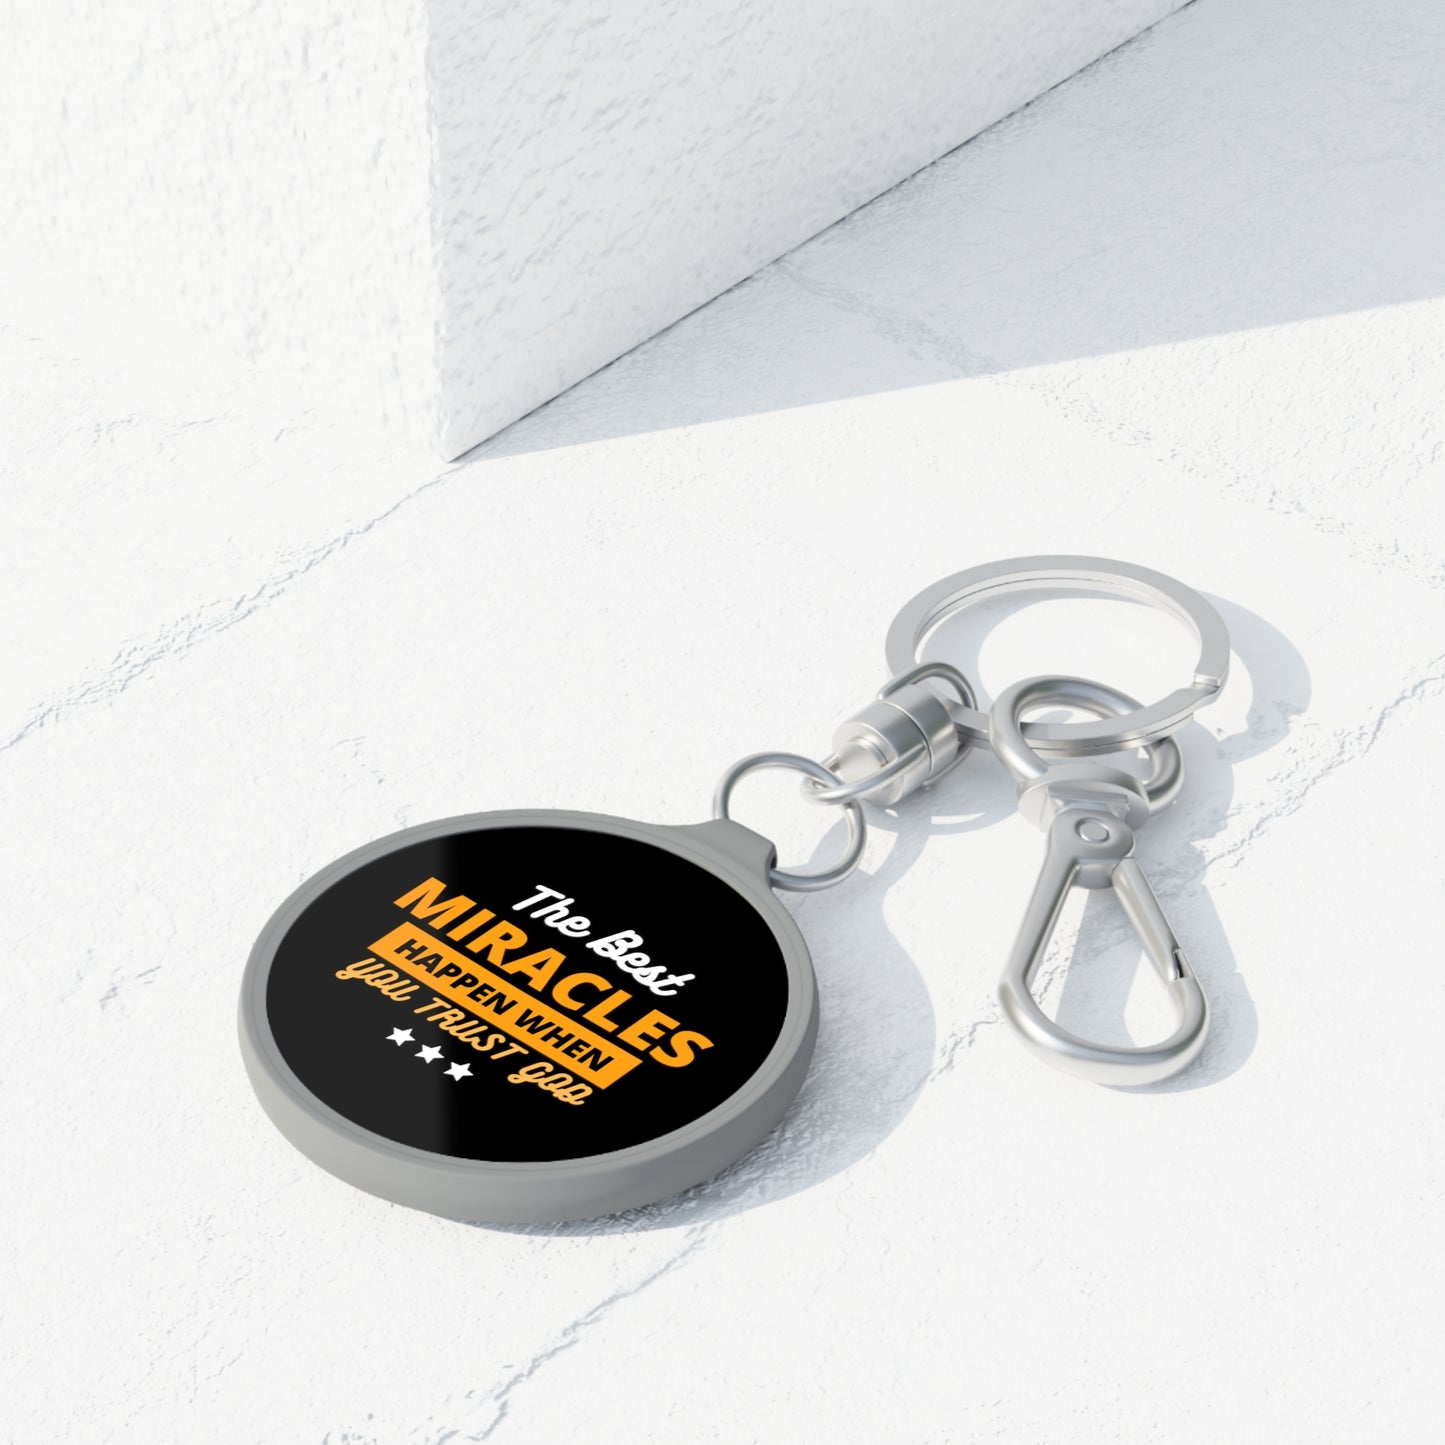 The Best Miracles Happen When You Trust God Key Fob Printify